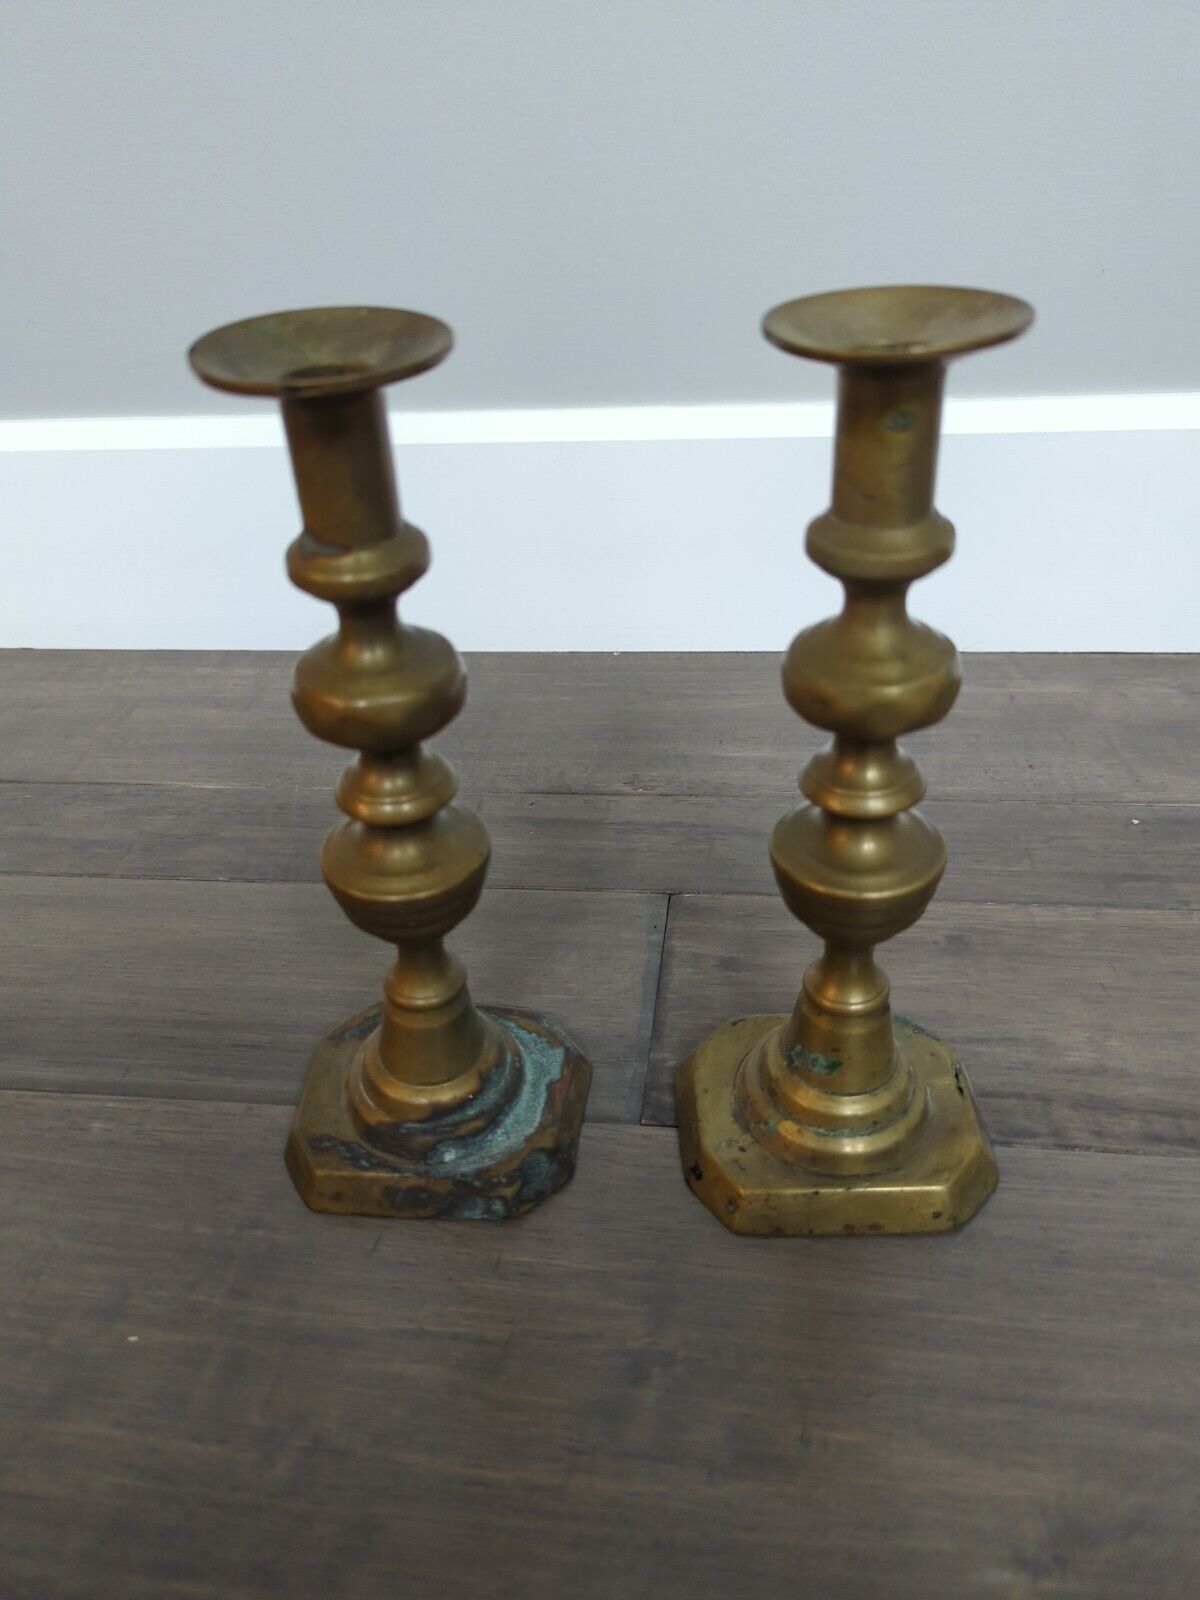 Antique Vintage Pair of Brass Candlesticks English Georgian Style  10 Inches